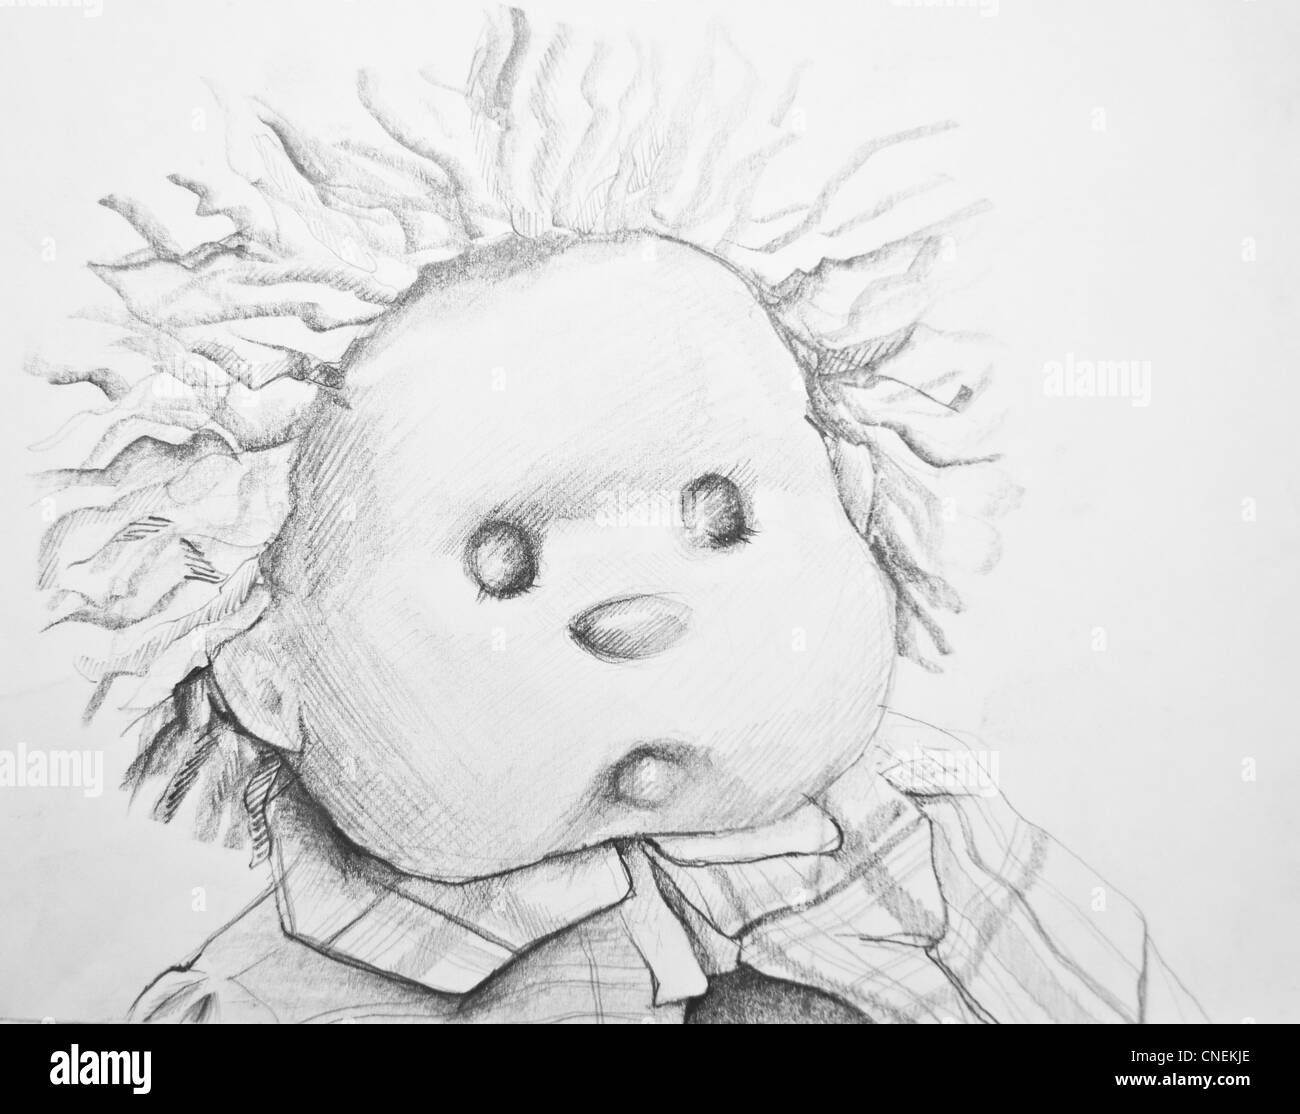 Another pencil doll #doll #draw #drawing #shading #pencil … | Flickr